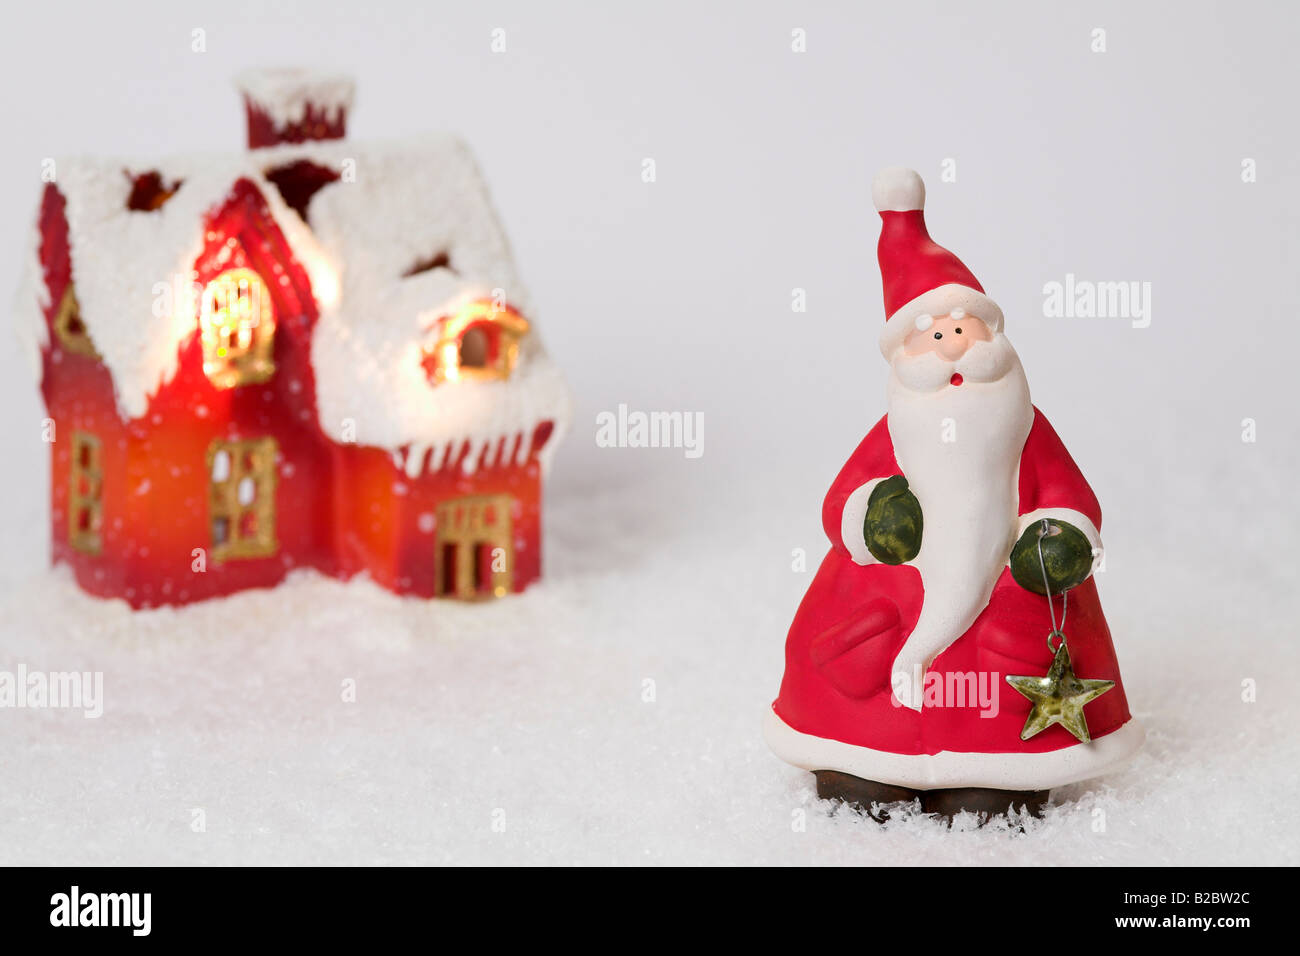 Christmas house and Father Christmas made of clay on artificial snow Stock Photo